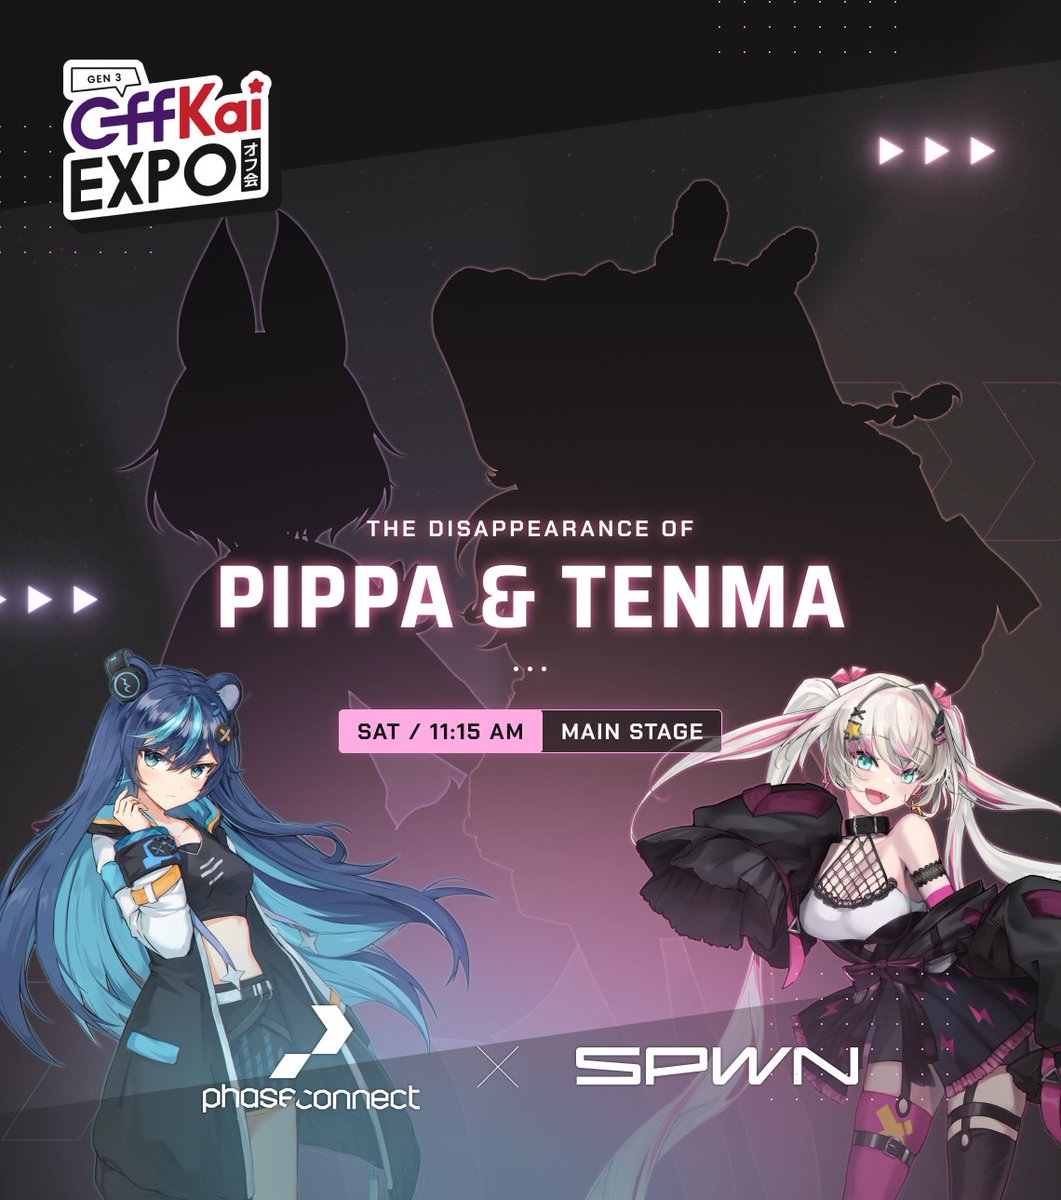 Where have Pippa and Tenma gone? Find out at #OffKaiGen3 on the Main Stage on Saturday! 

#PhaseConnect